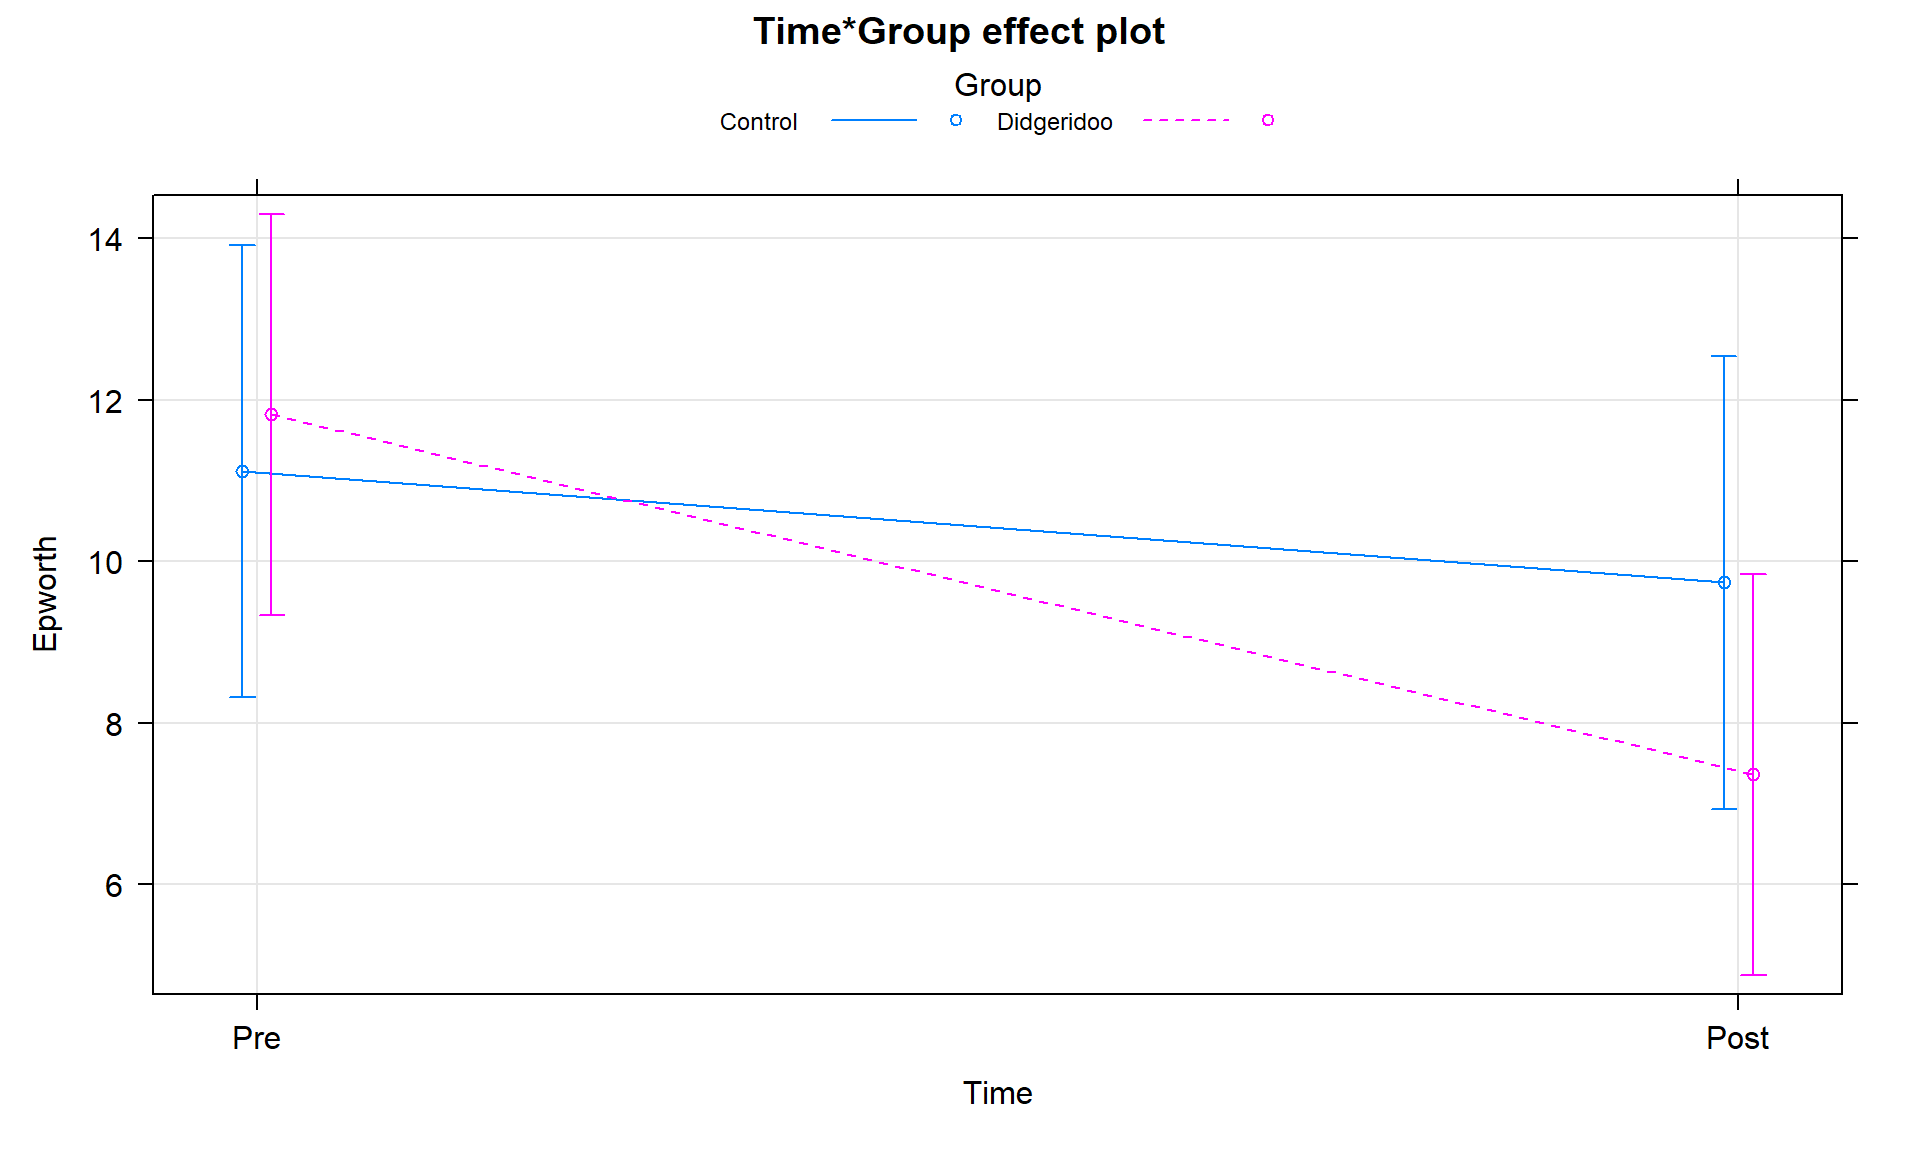 Term-plot of Time by Group interaction, results are from model that accounts for subject-to-subject variation in a mixed model.